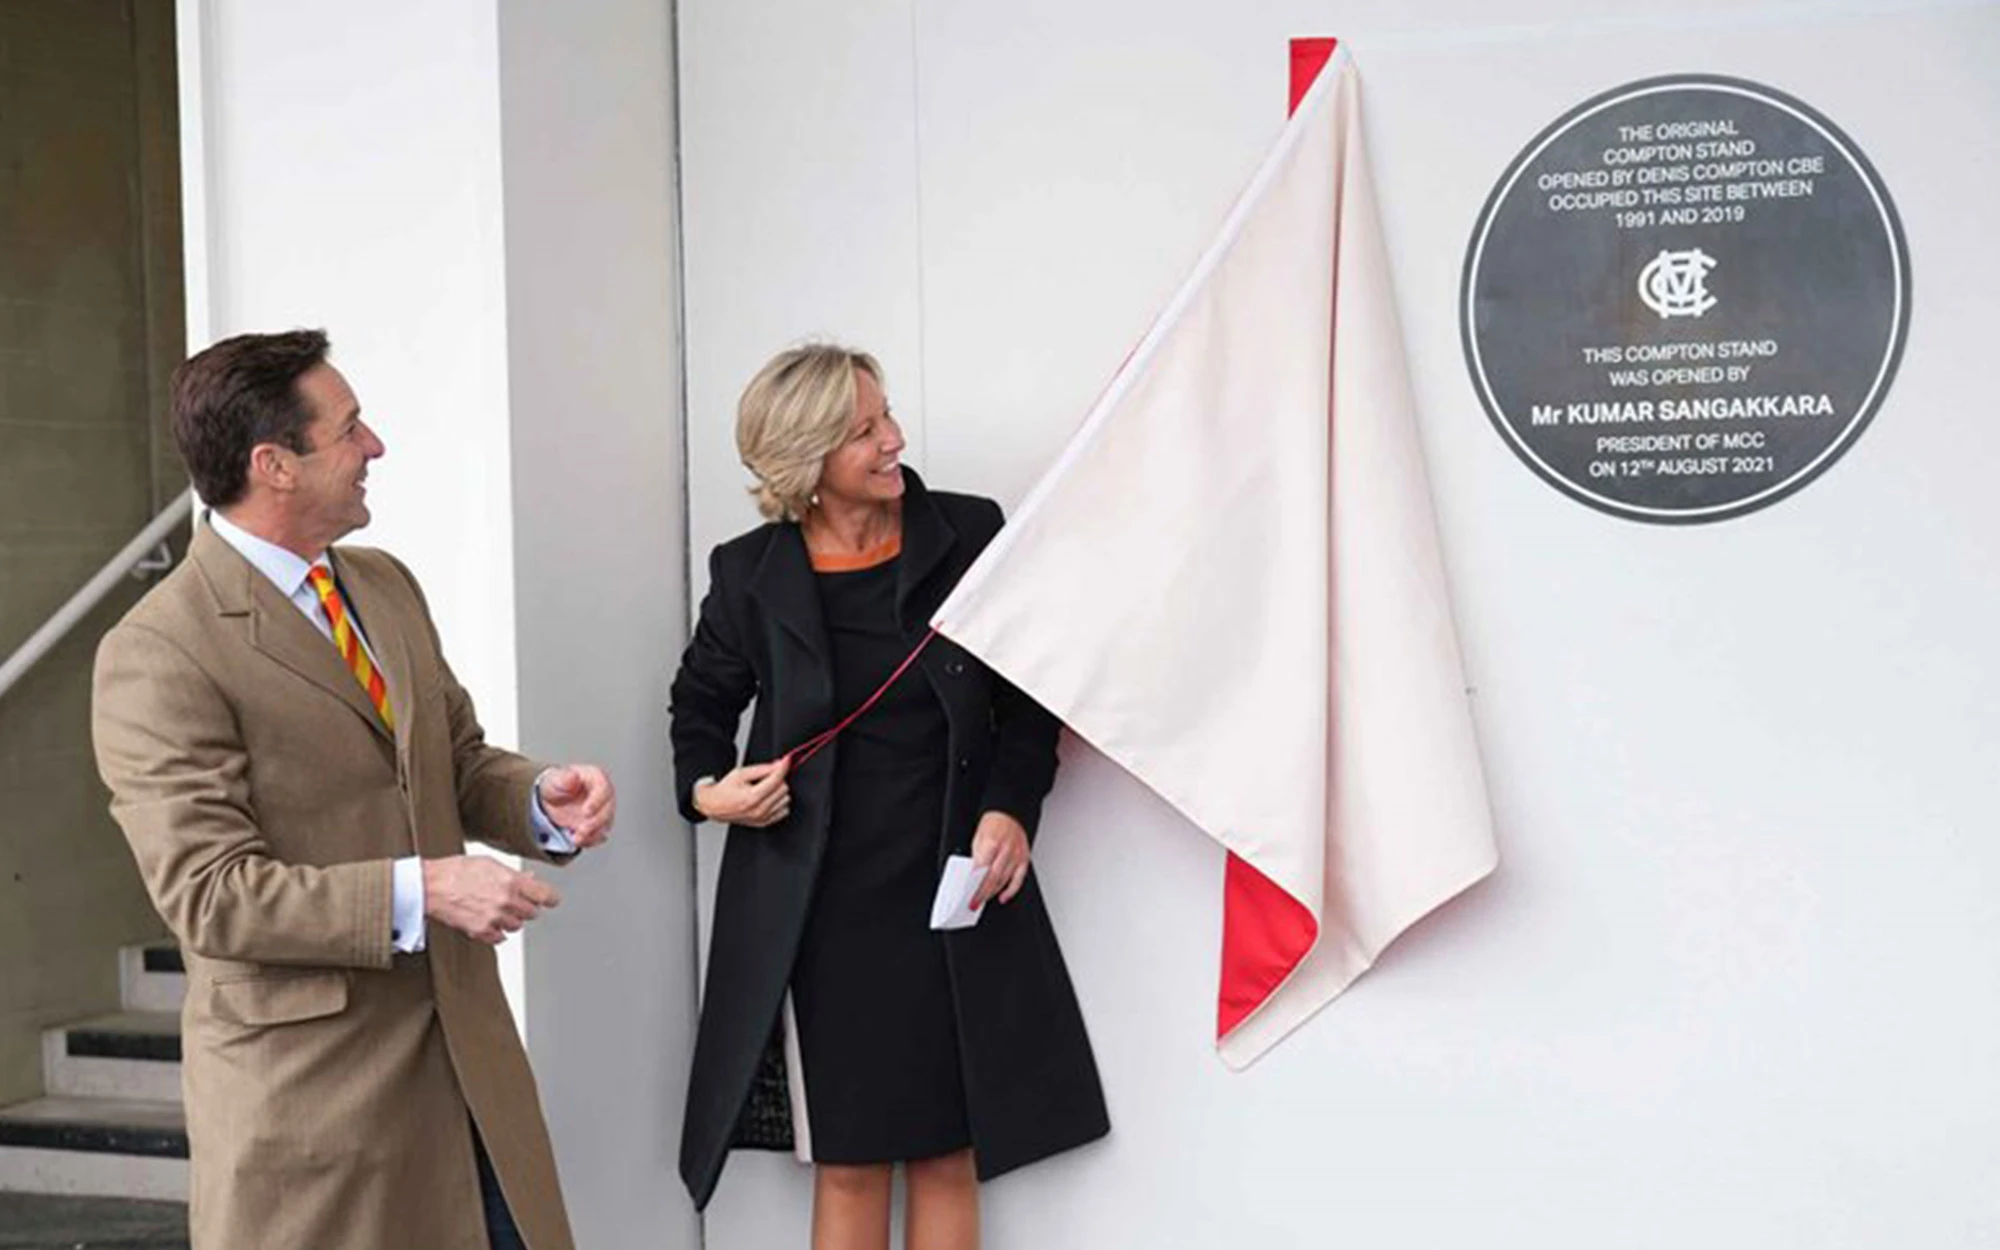 plaque unveiling at lord's cricket grounds